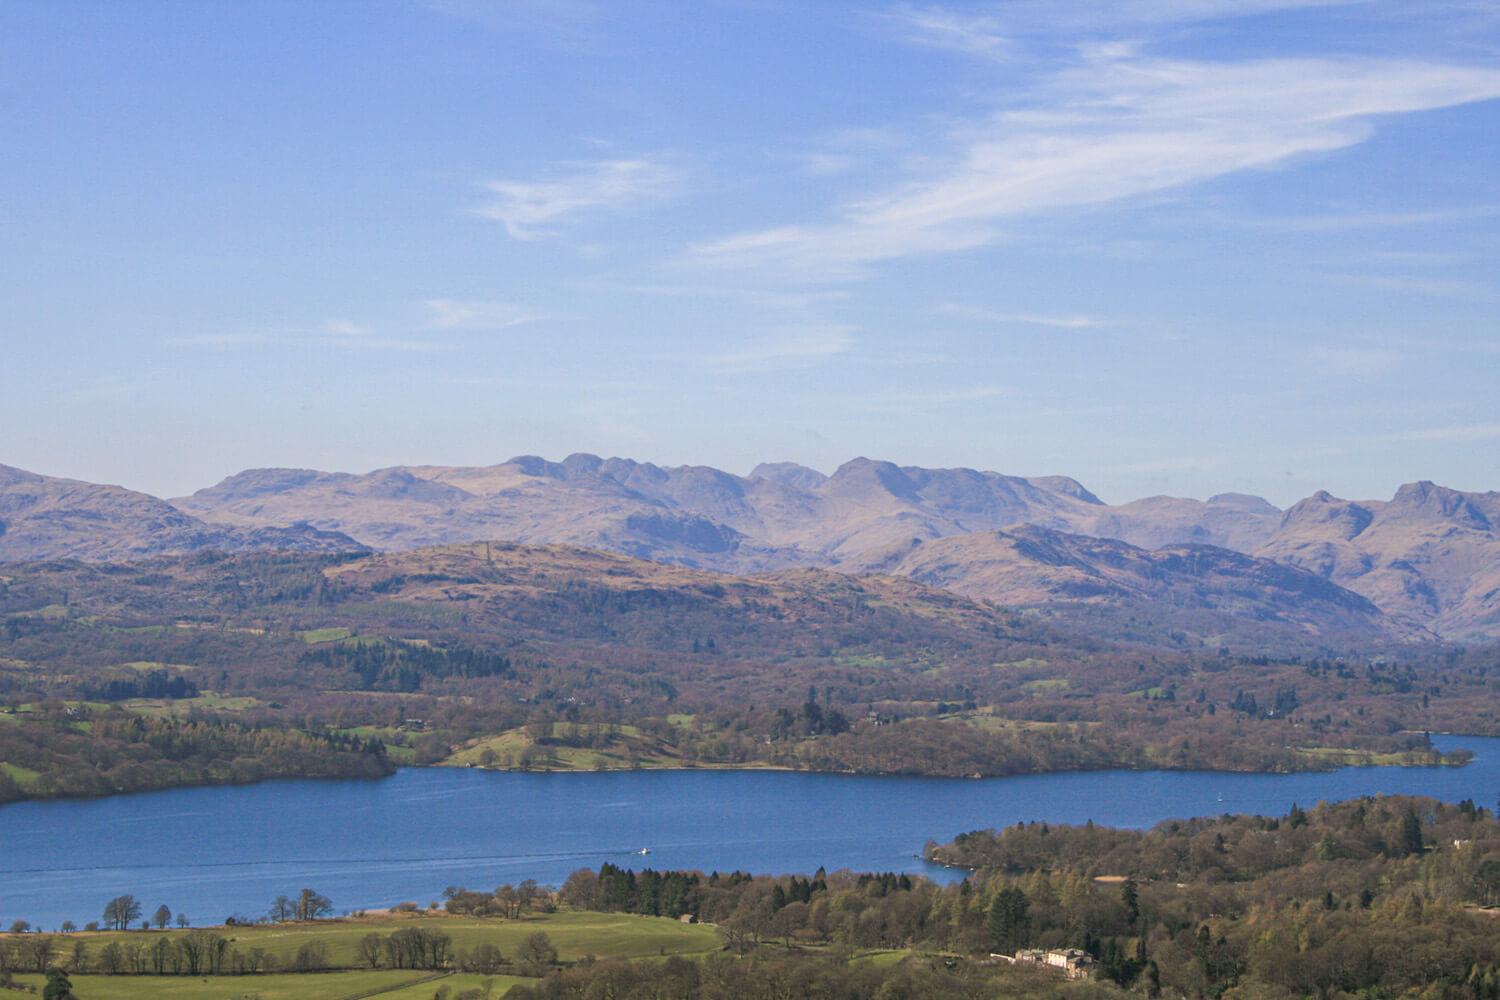 How much do you know about the lakes of the Lake District? For instance, do you know how many lakes there are in the Lake District? It's a trick question of course, because the answer is one.